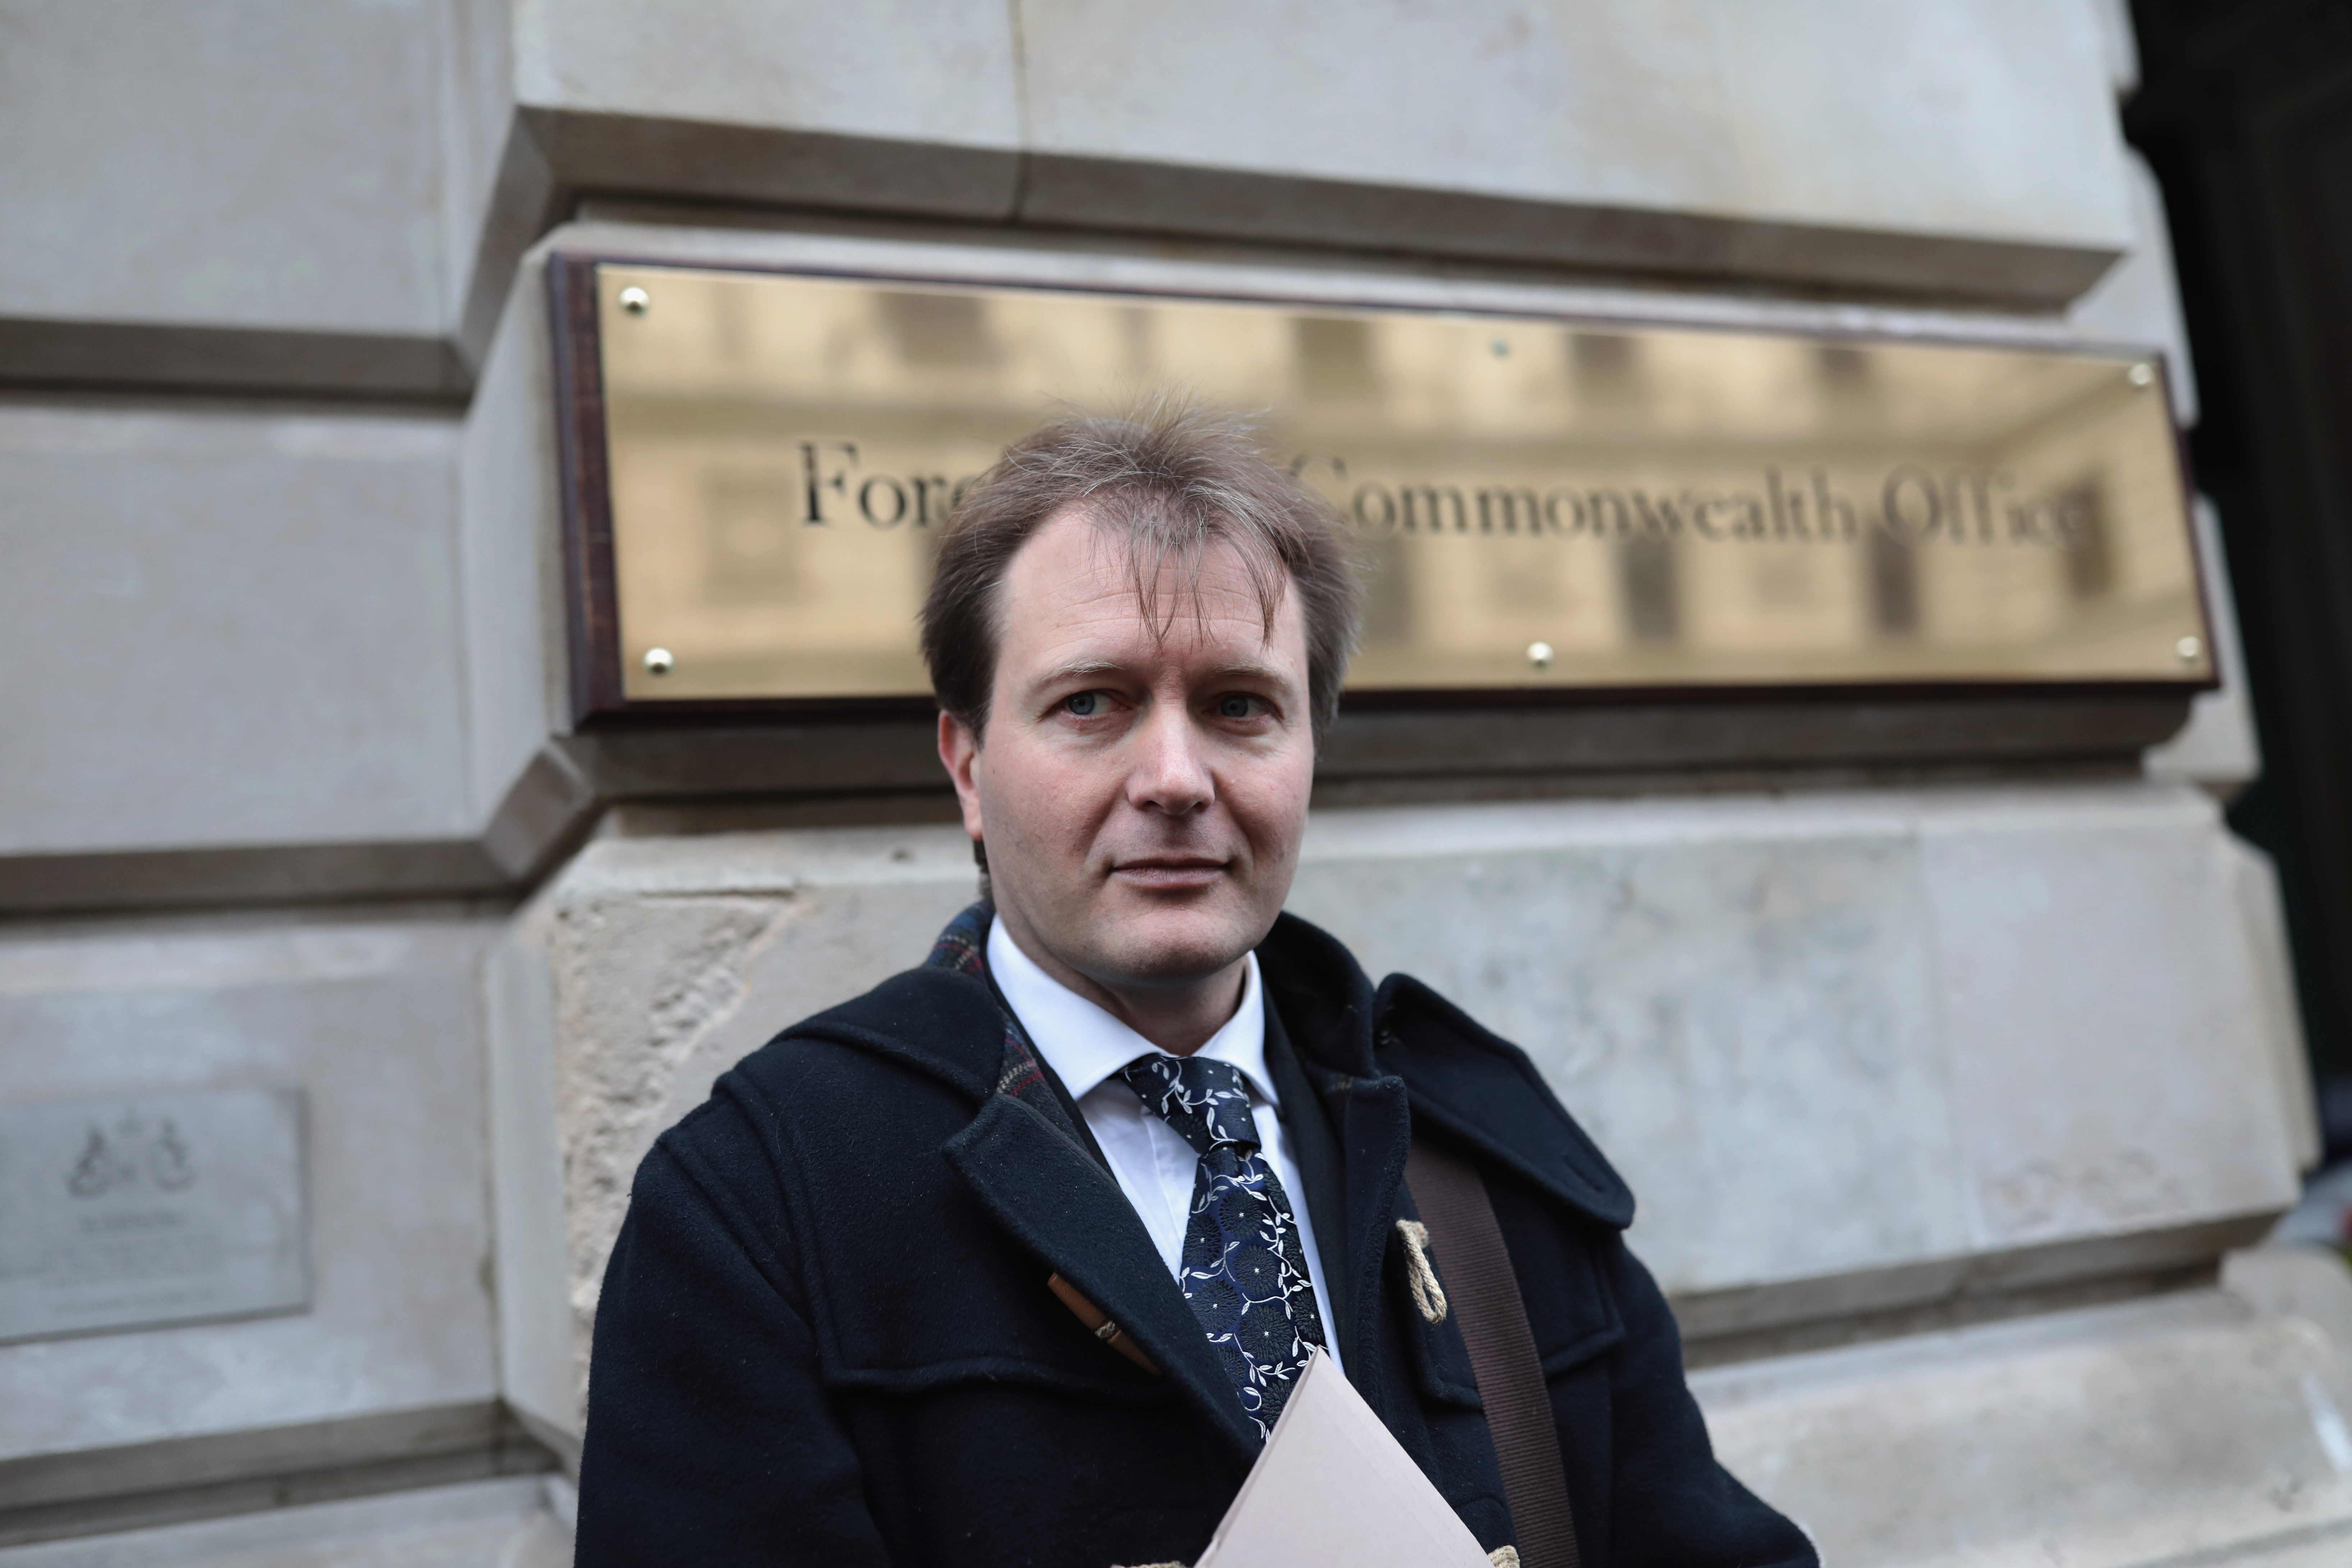 LONDON, ENGLAND - NOVEMBER 15: Richard Ratcliffe, the husband of the detained British-Iranian woman Nazanin Zaghari-Ratcliffe arrives at the Foreign and Commonwealth Office to meet with Foreign Secretary Boris Johnson on November 15, 2017 in London, England. Nazanin has been held in Tehran since April 2016 after a family holiday with her daughter to Iran, but has been accused of trying to overthrow the Government which she denies. (Photo by Jack Taylor/Getty Images)